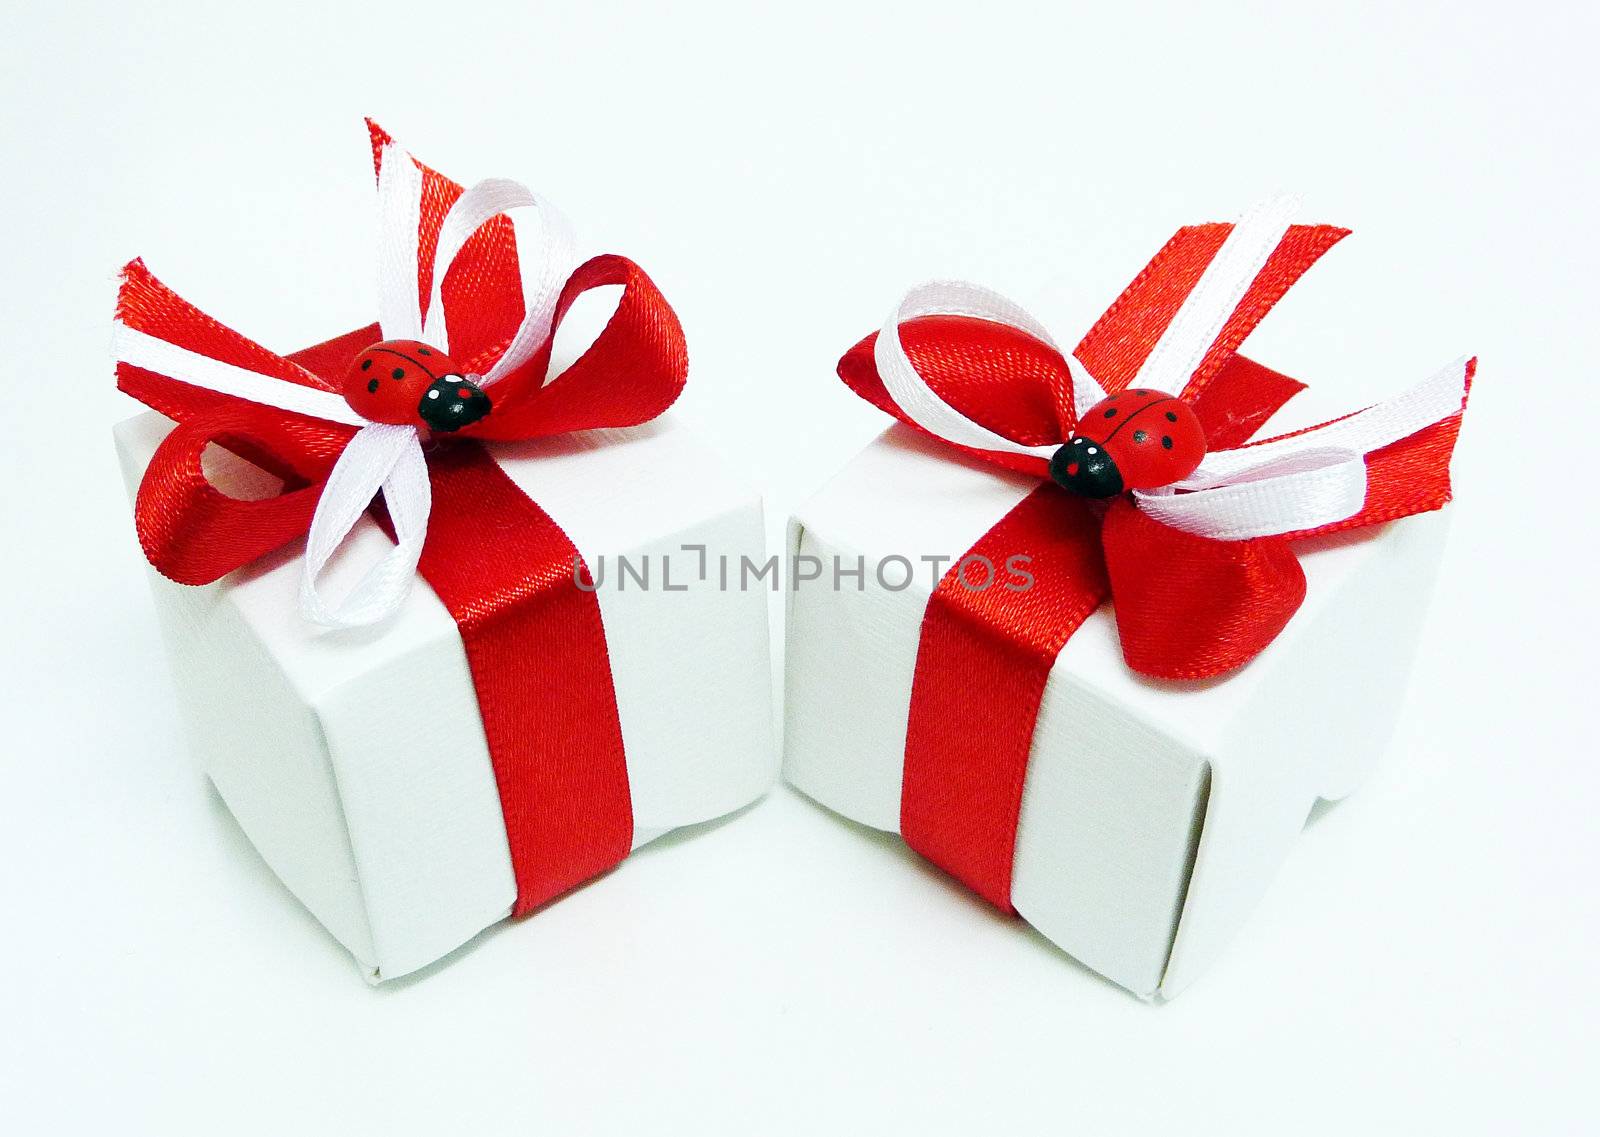 White gift boxes with red ribbons and ladybugs